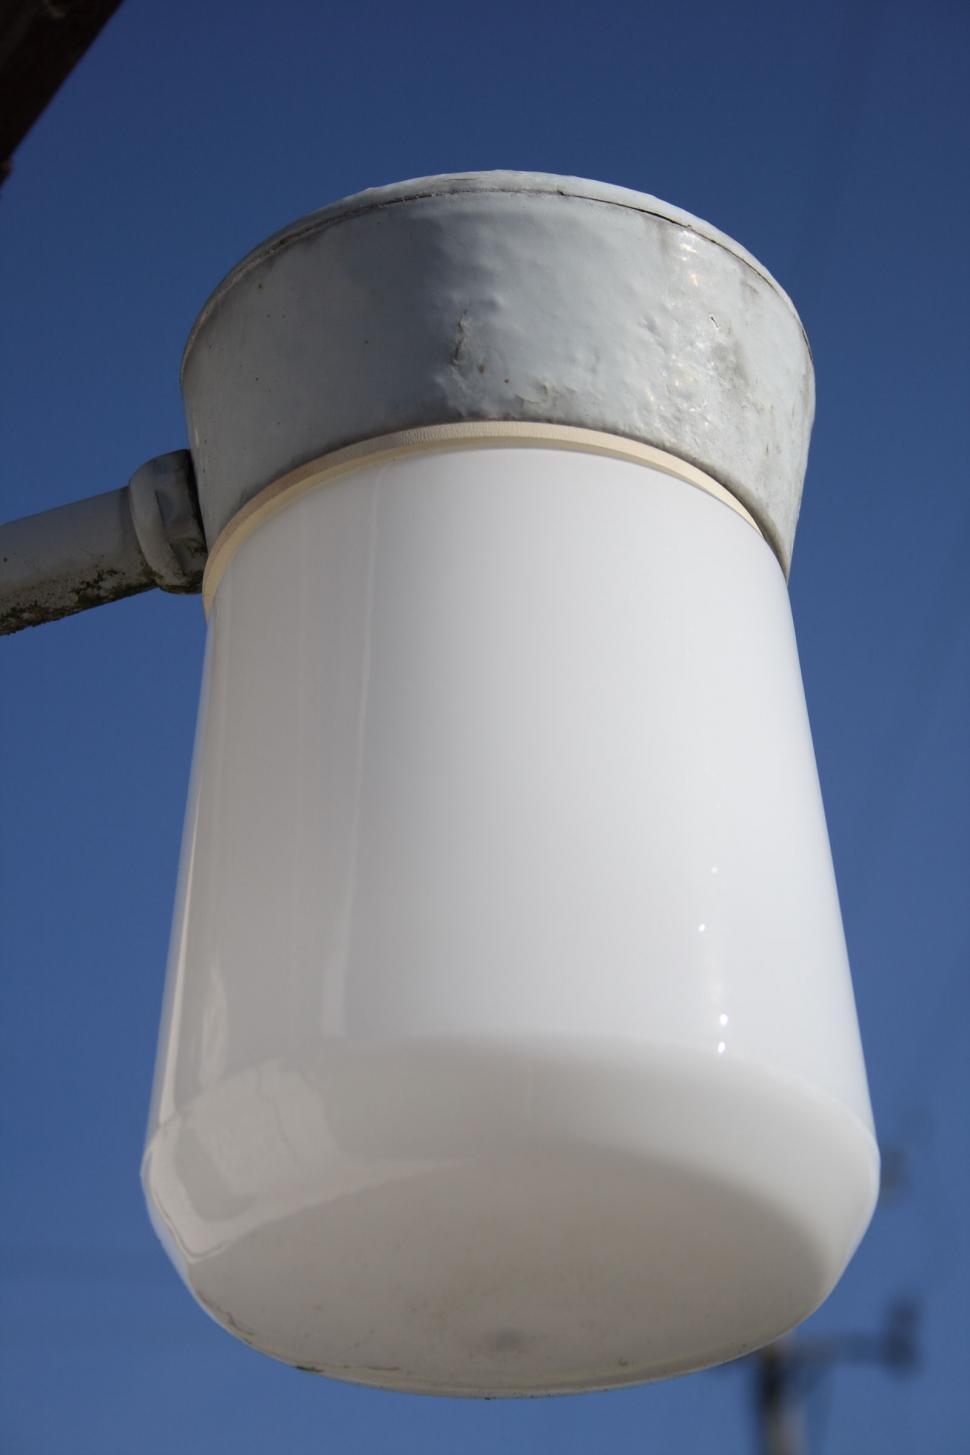 Free Image of White Light Fixture Against Blue Sky 